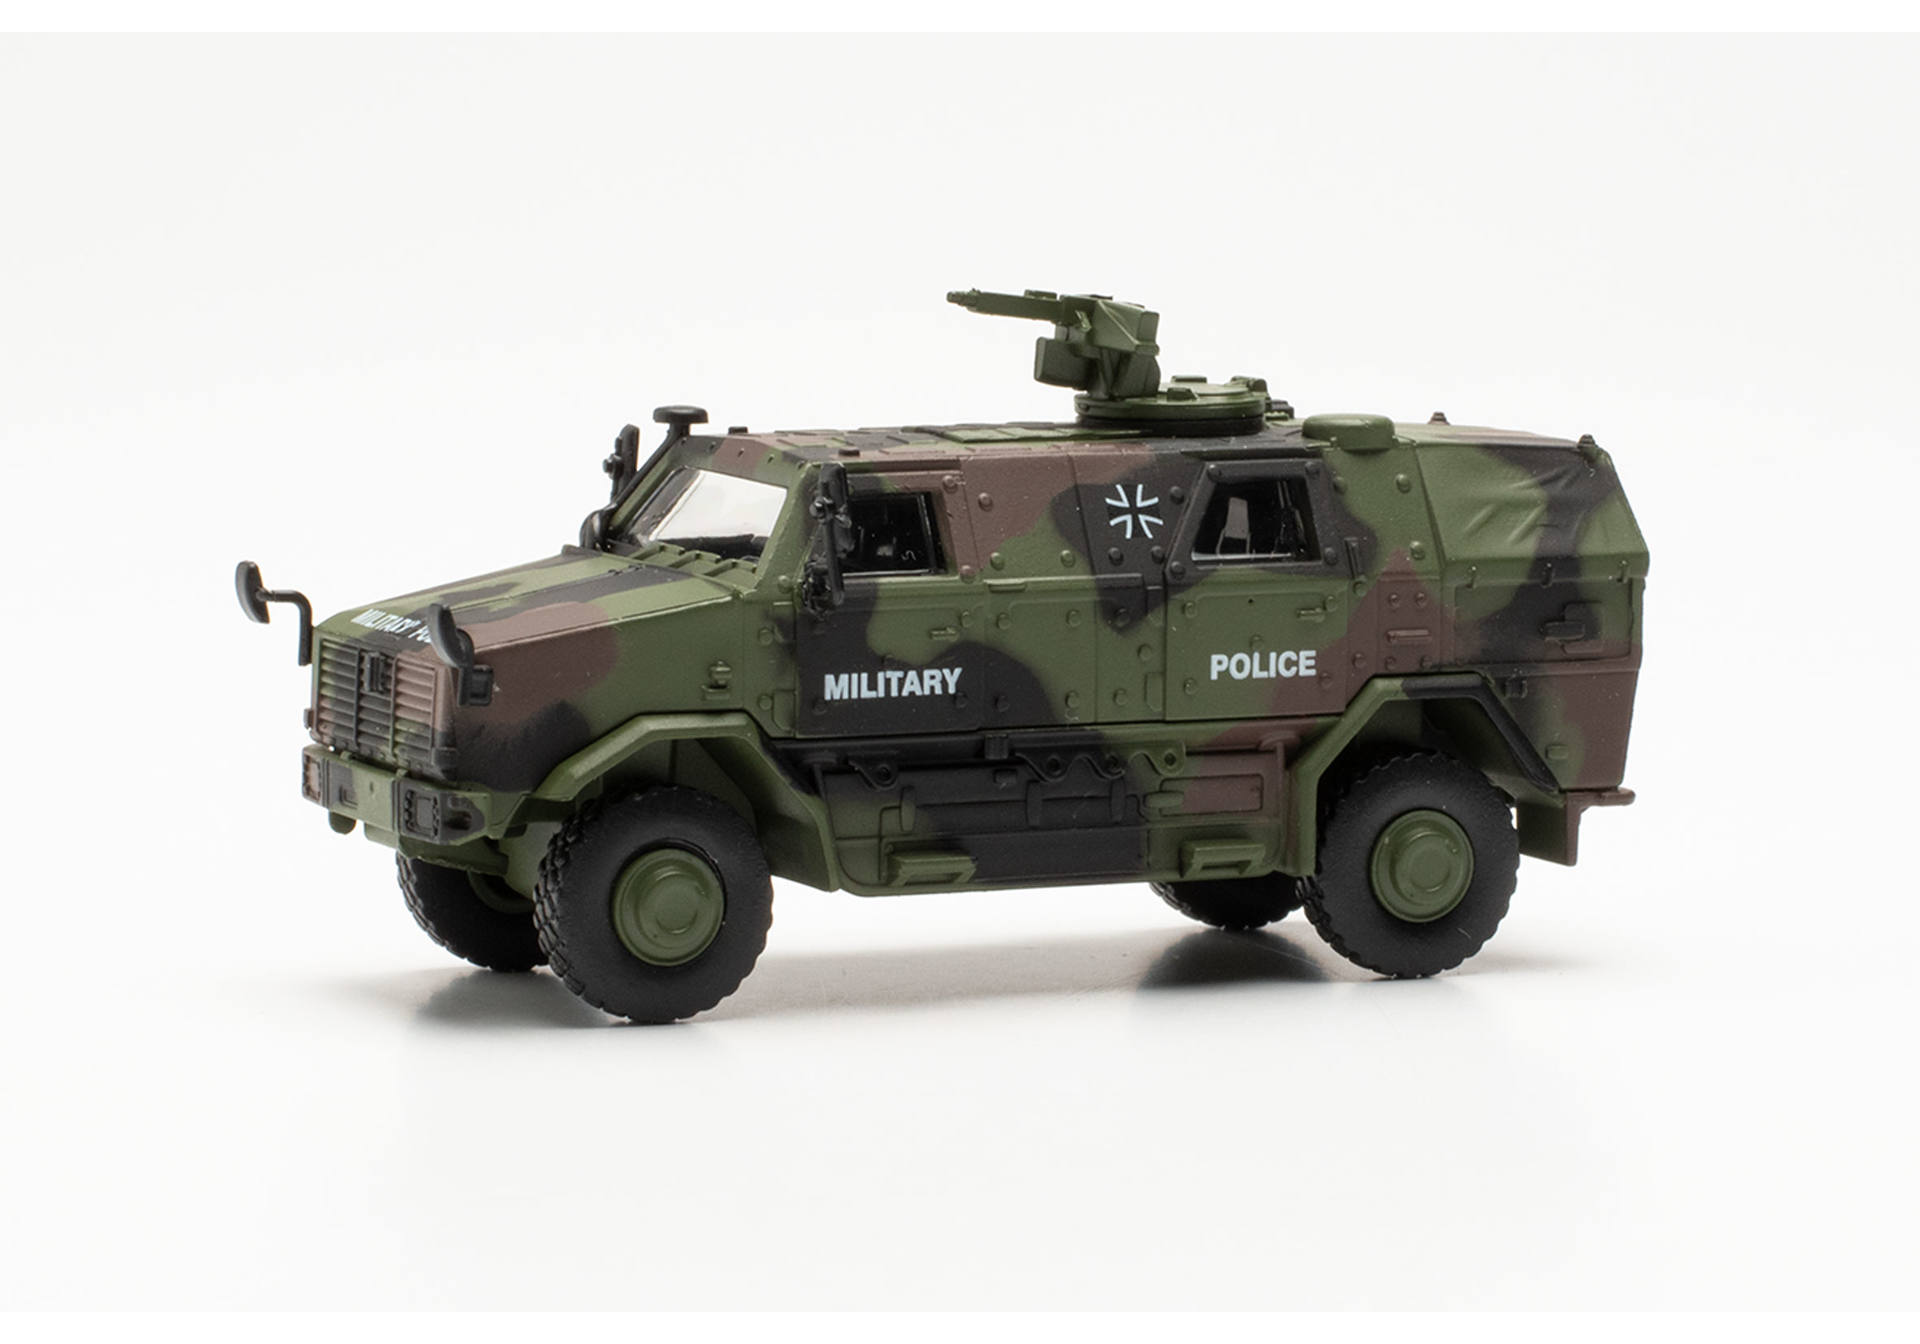 ATF (all-protected transport vehicle) Dingo 2 “German Armed Forces Military Police”